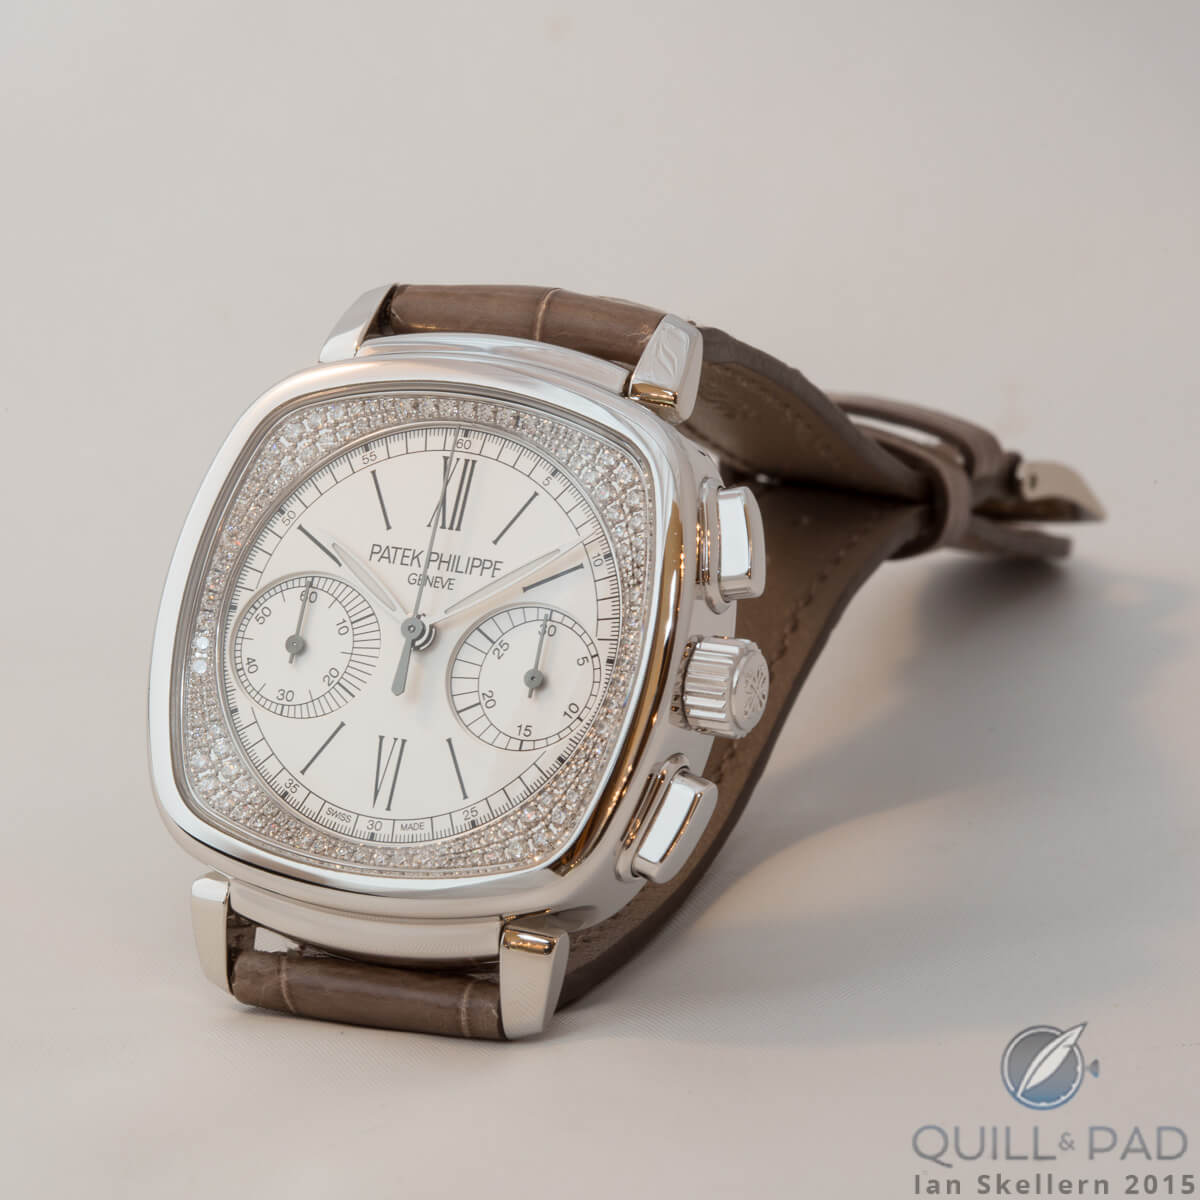 Patek Philippe Ladies First chronograph in white gold